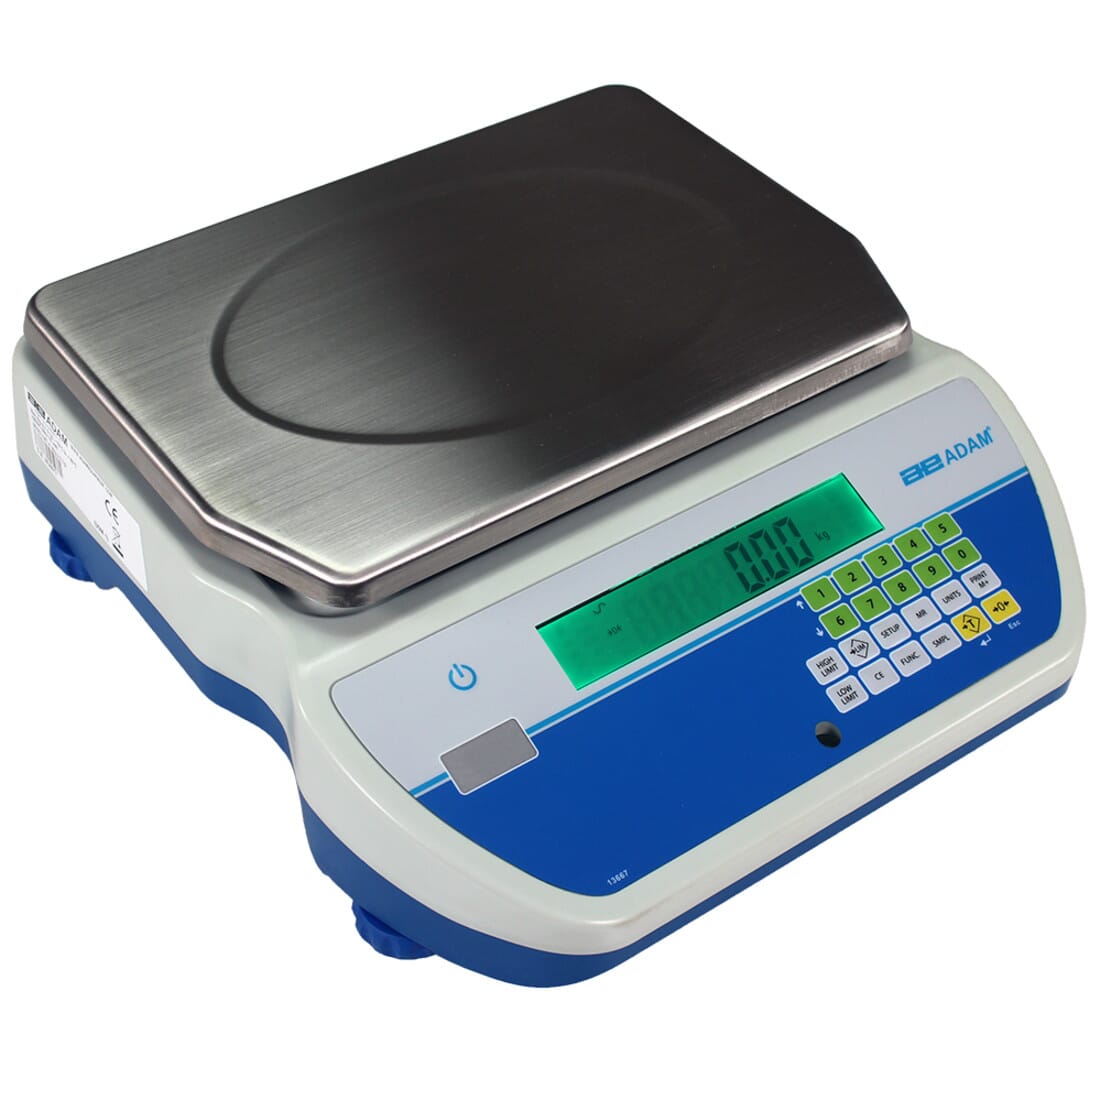 Cruiser CKT-M Approved Bench Checkweighing Scales-CKT 40M